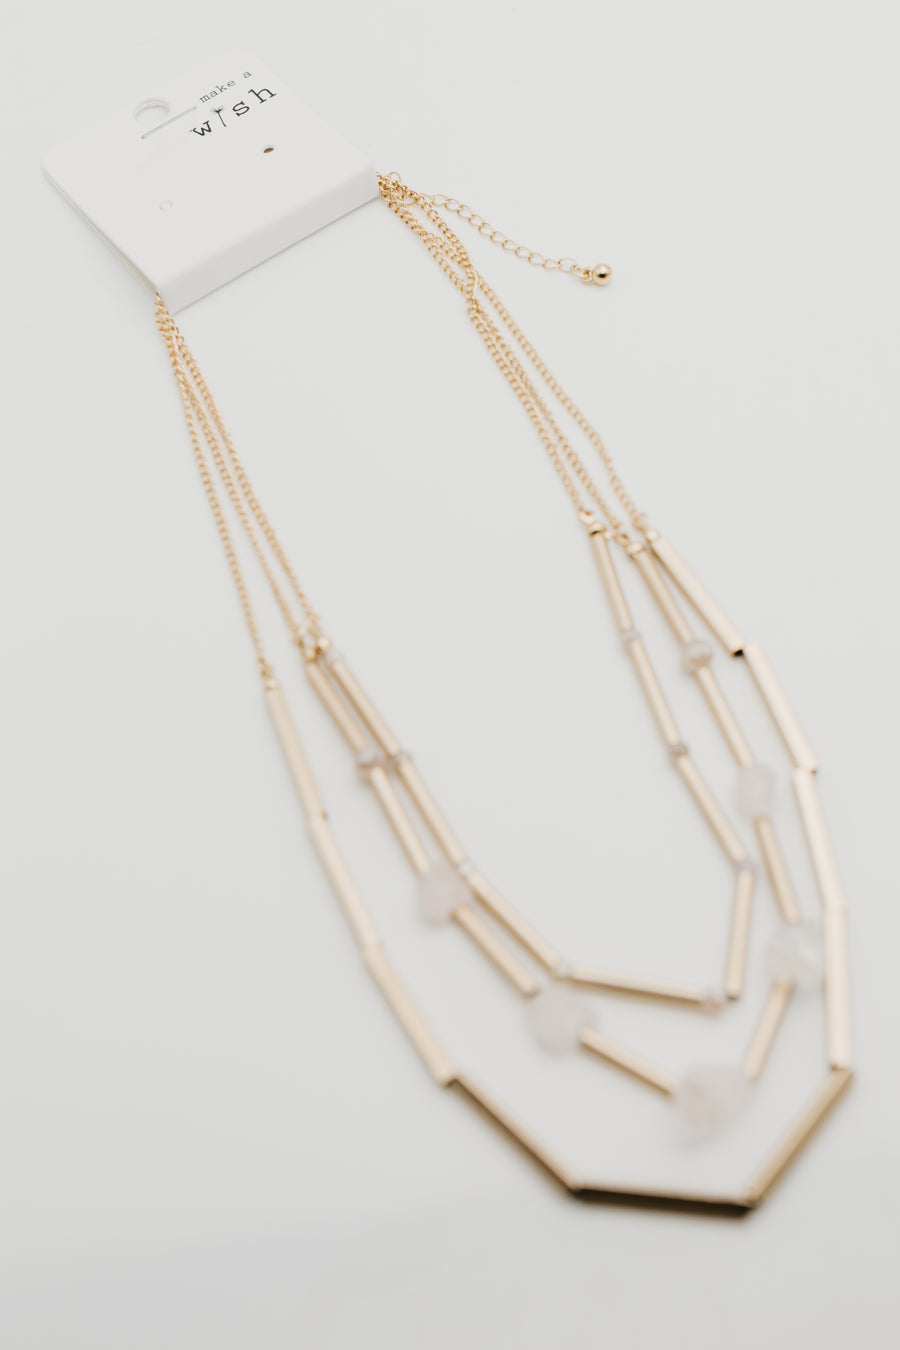 The McKinley Layered Stone Necklace